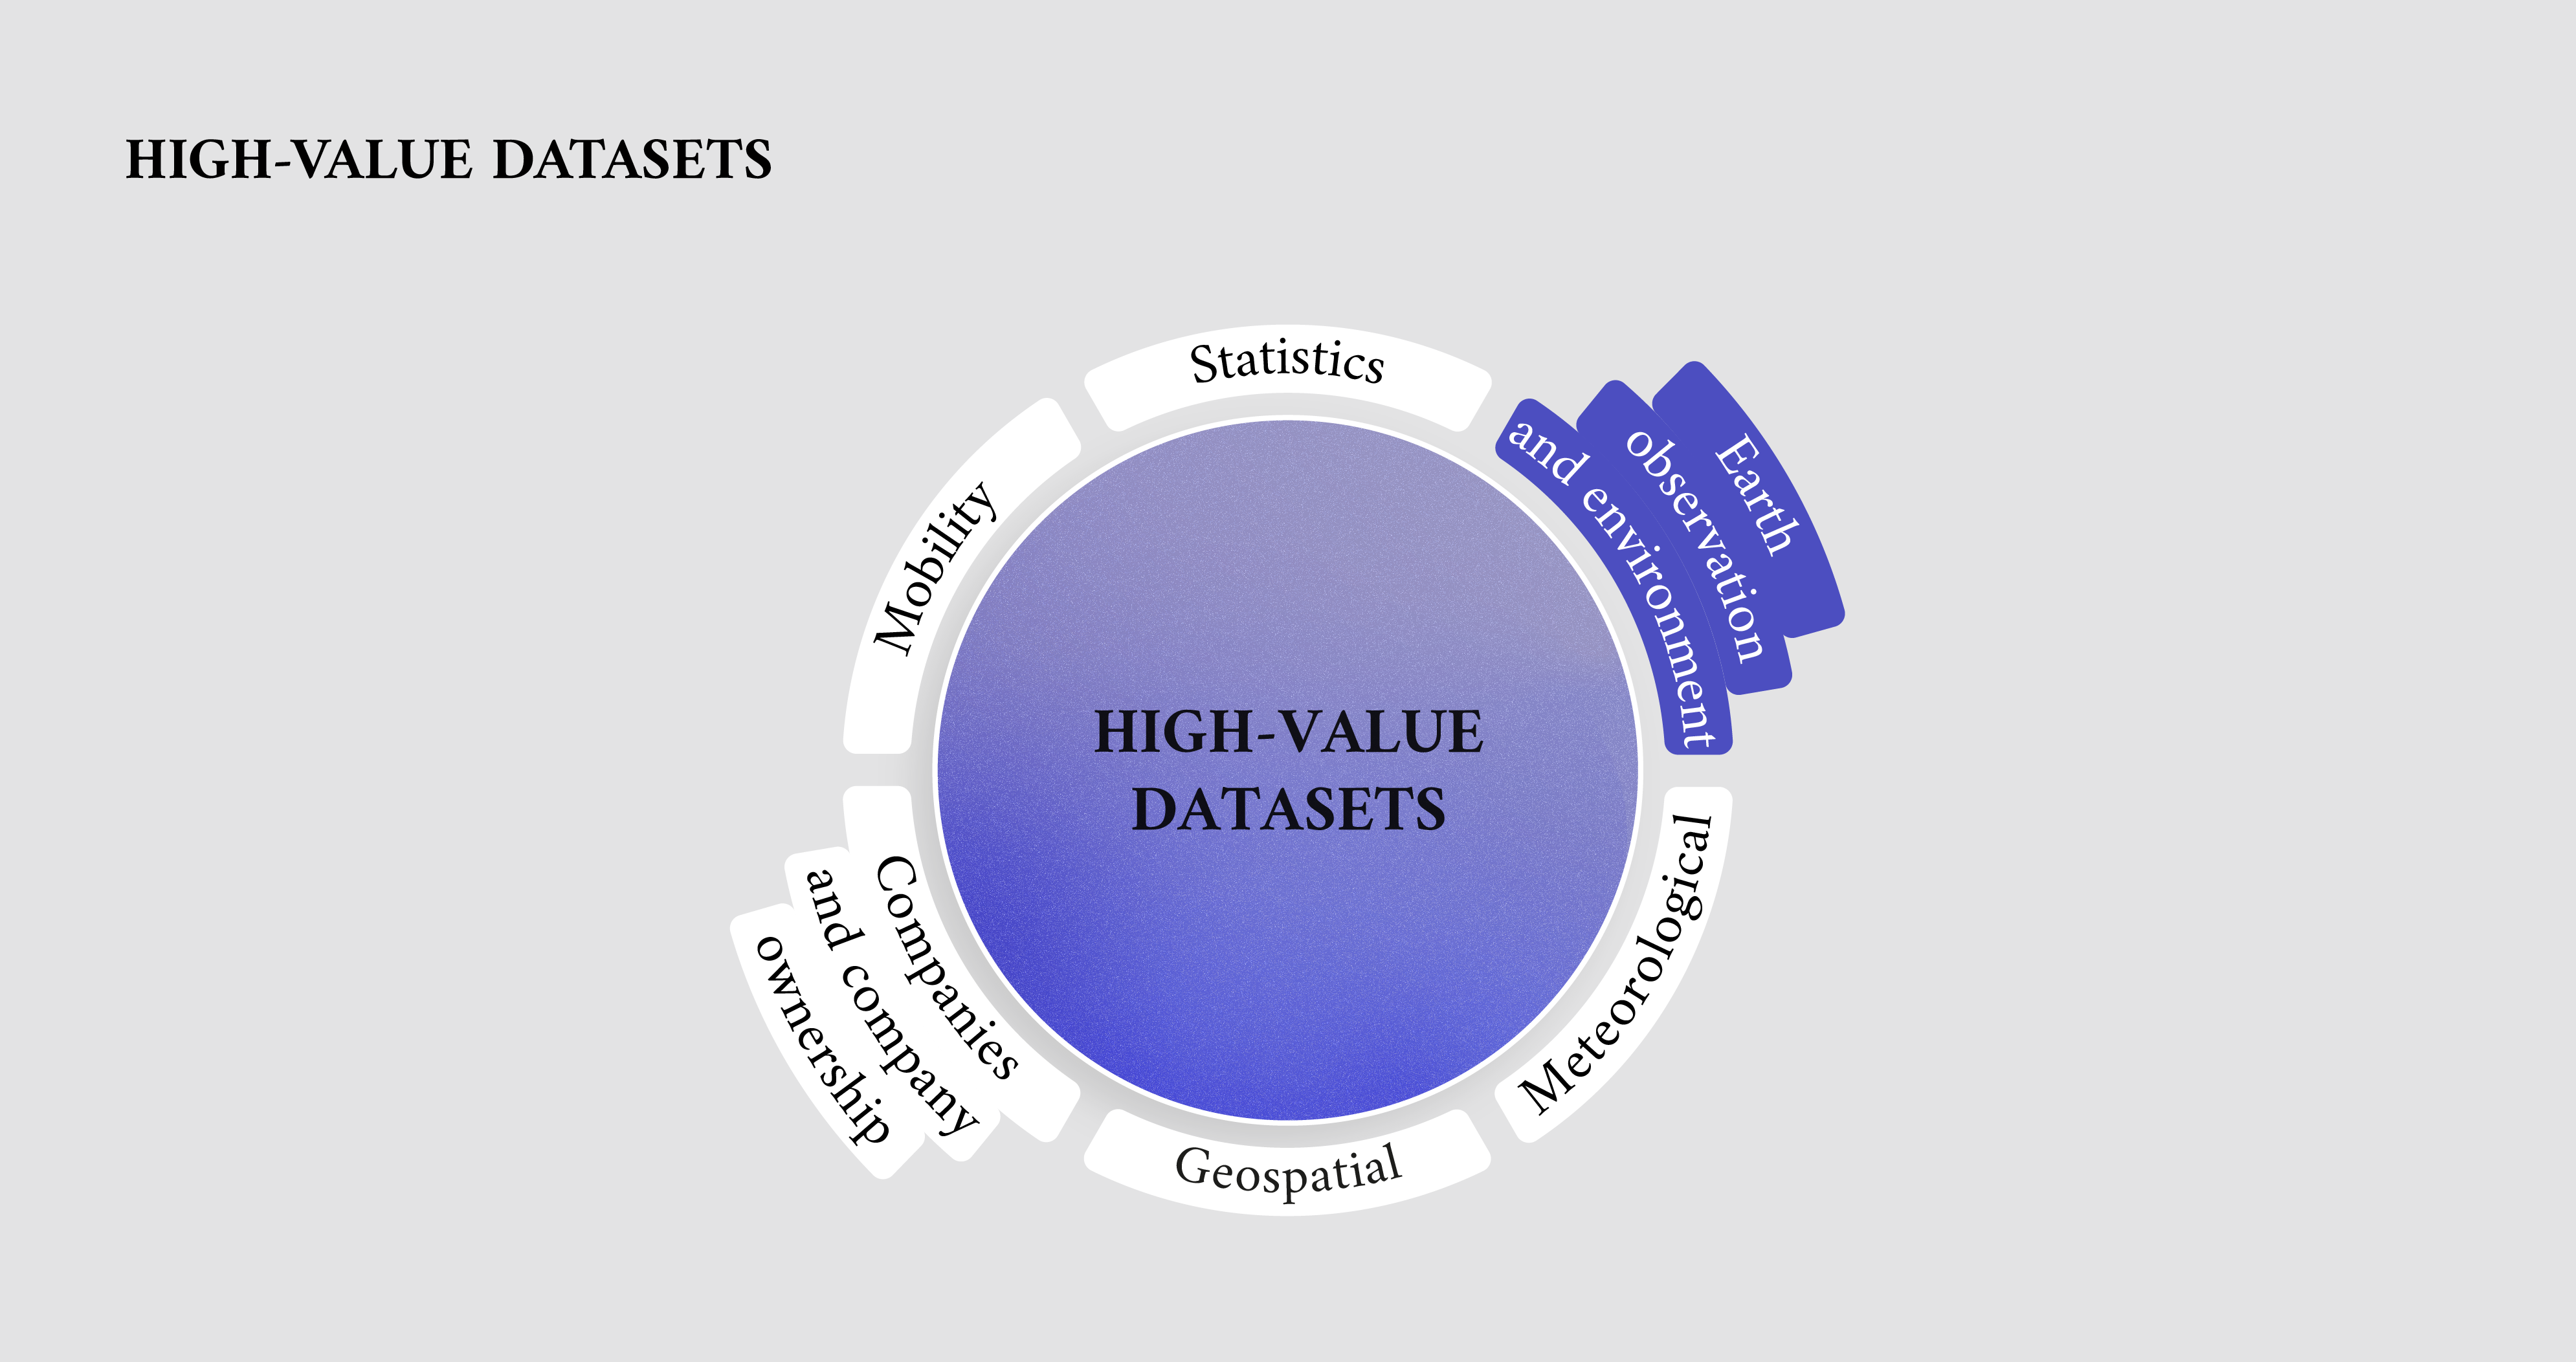 High-value datasets overview - Earth observations